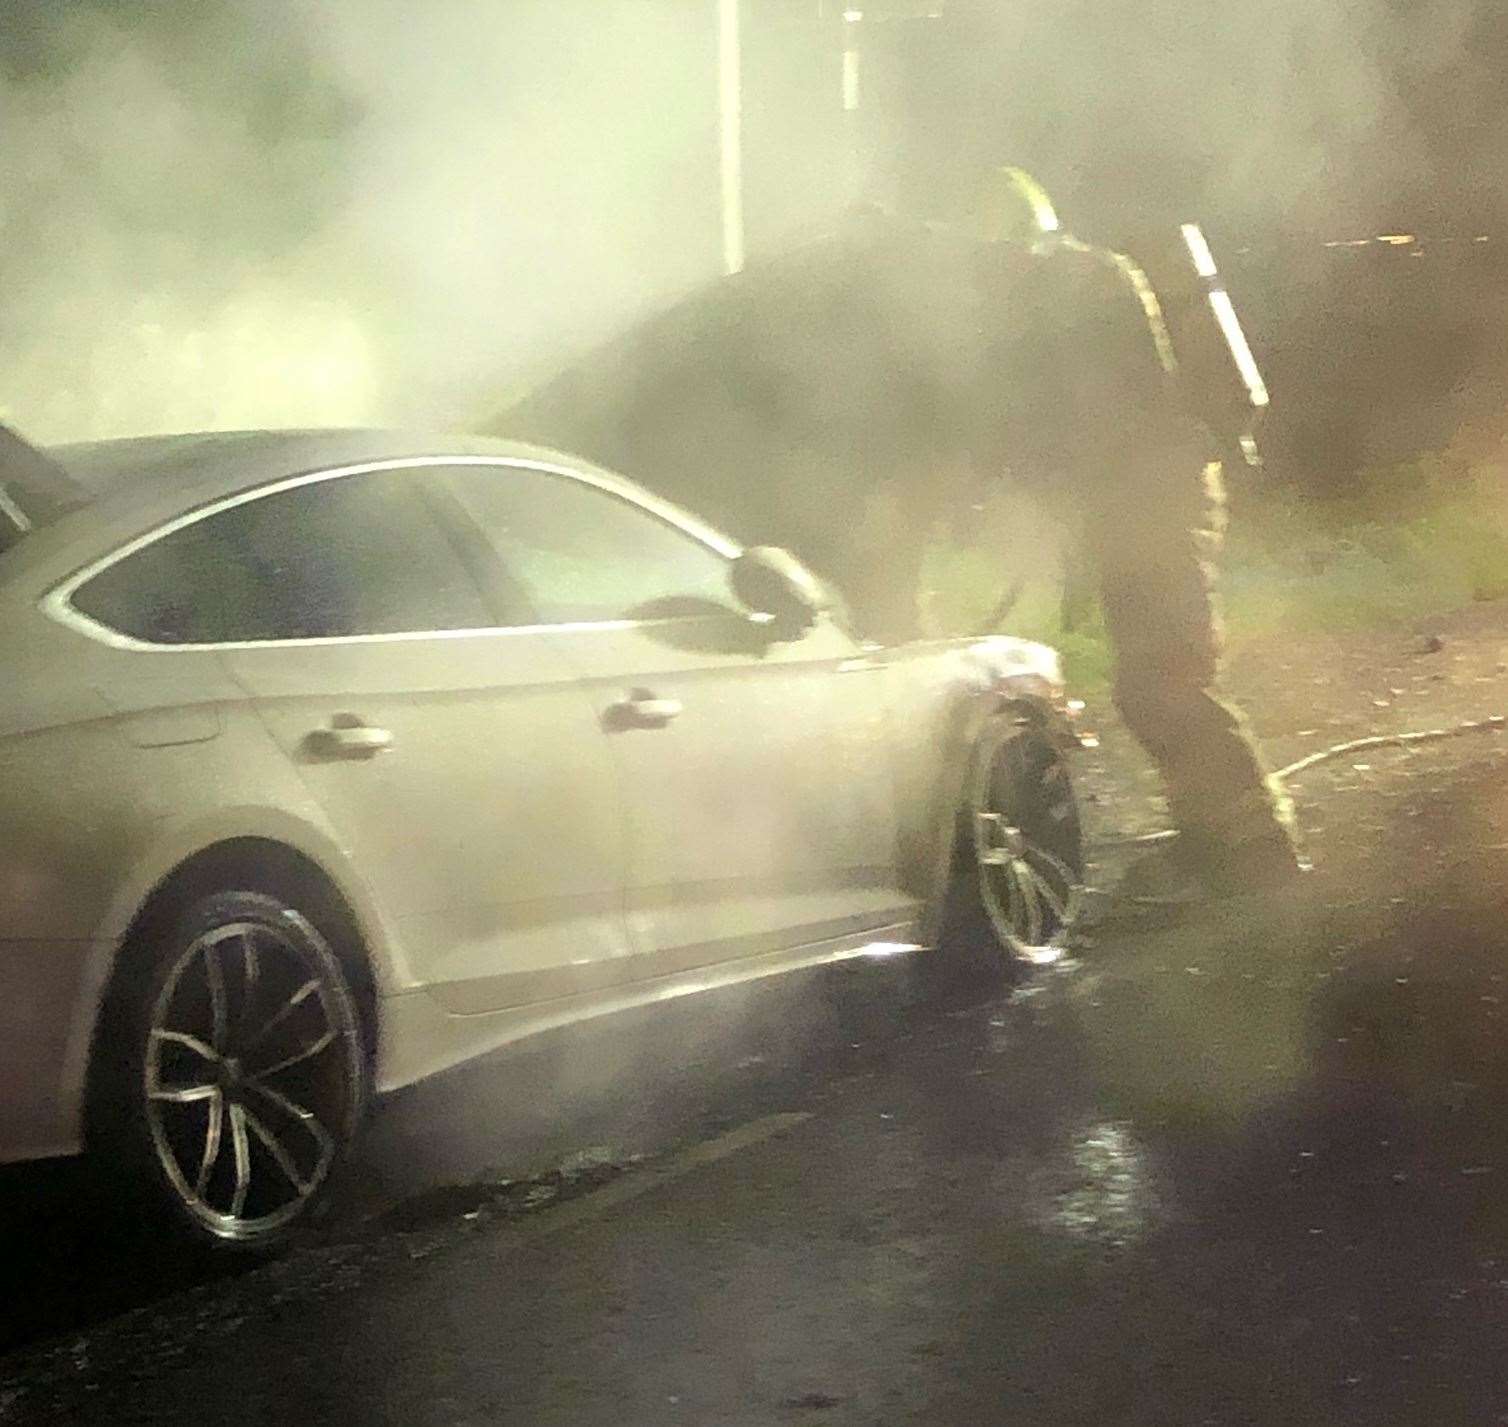 Firefighters put out the blaze when Leon's Audi A5 caught fire